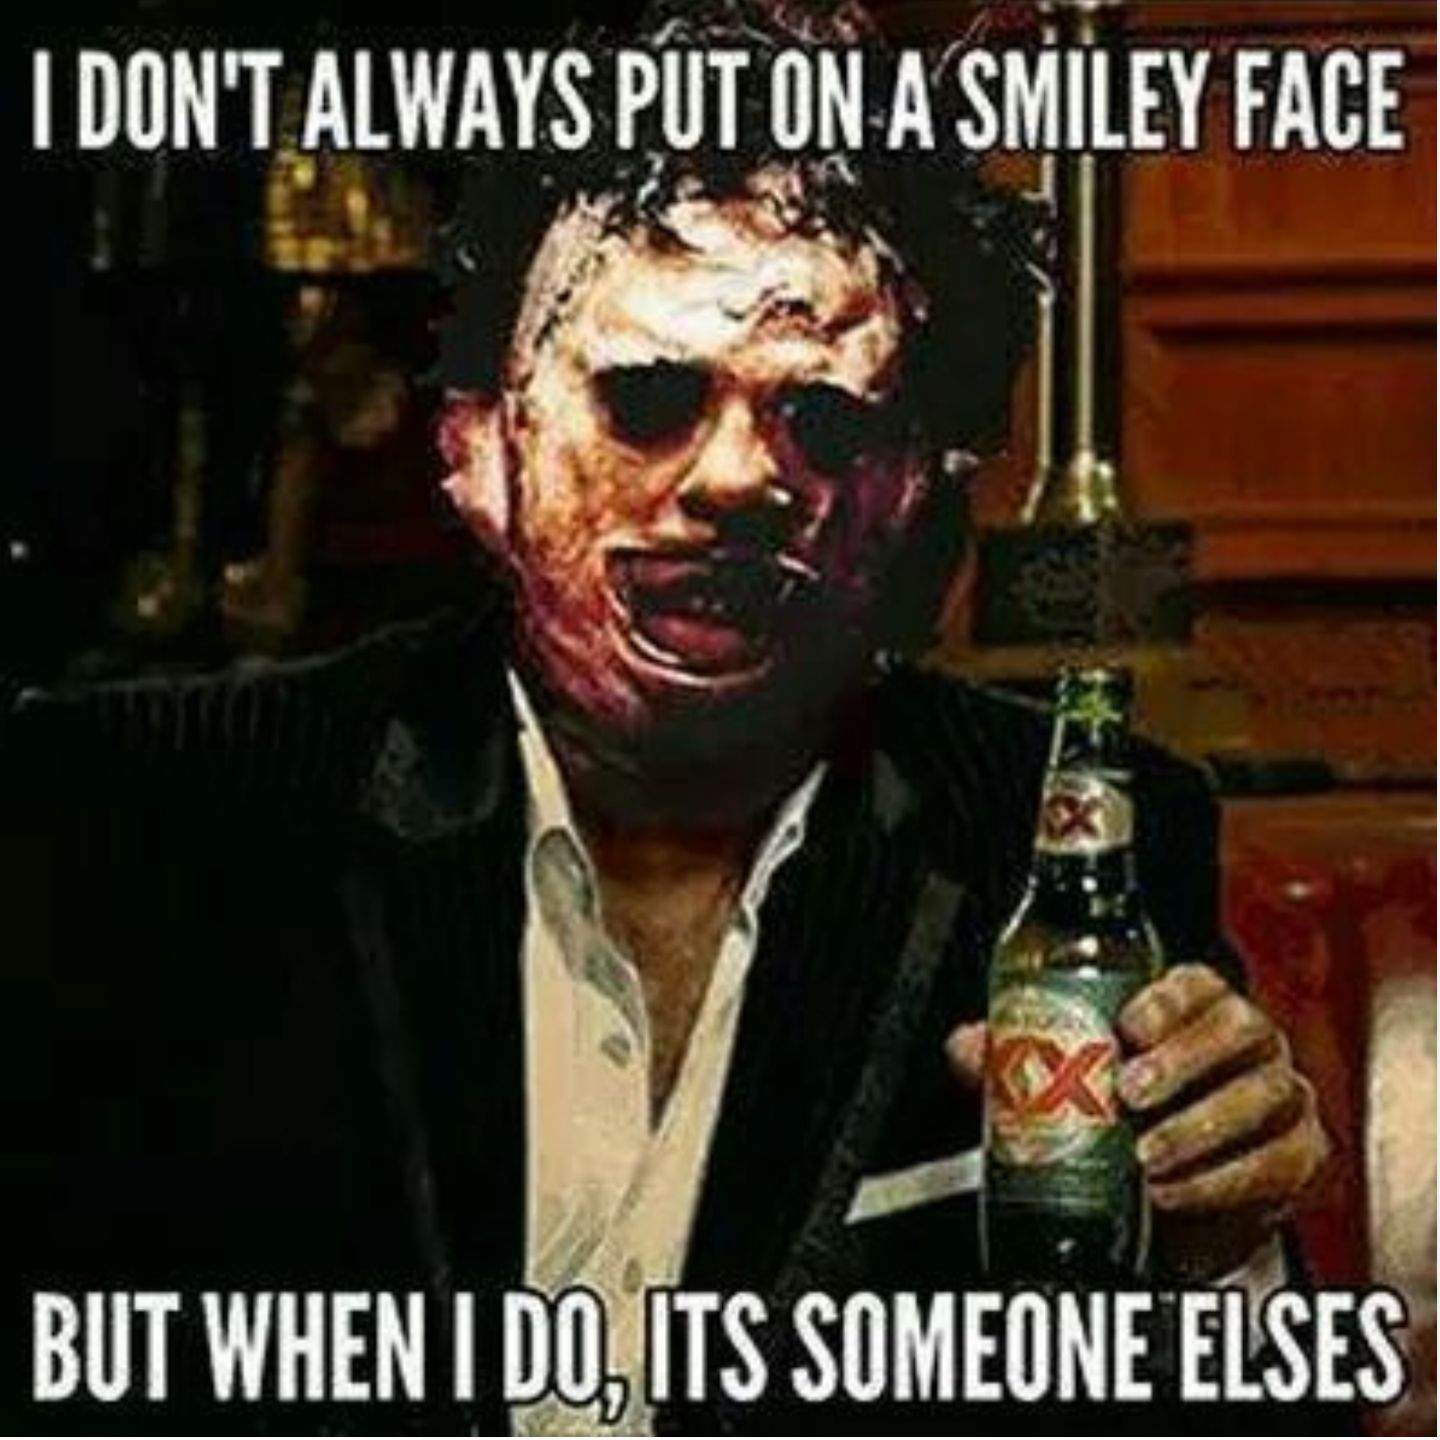 Meme about Leather face from Texas Chainsaw Masscre. 